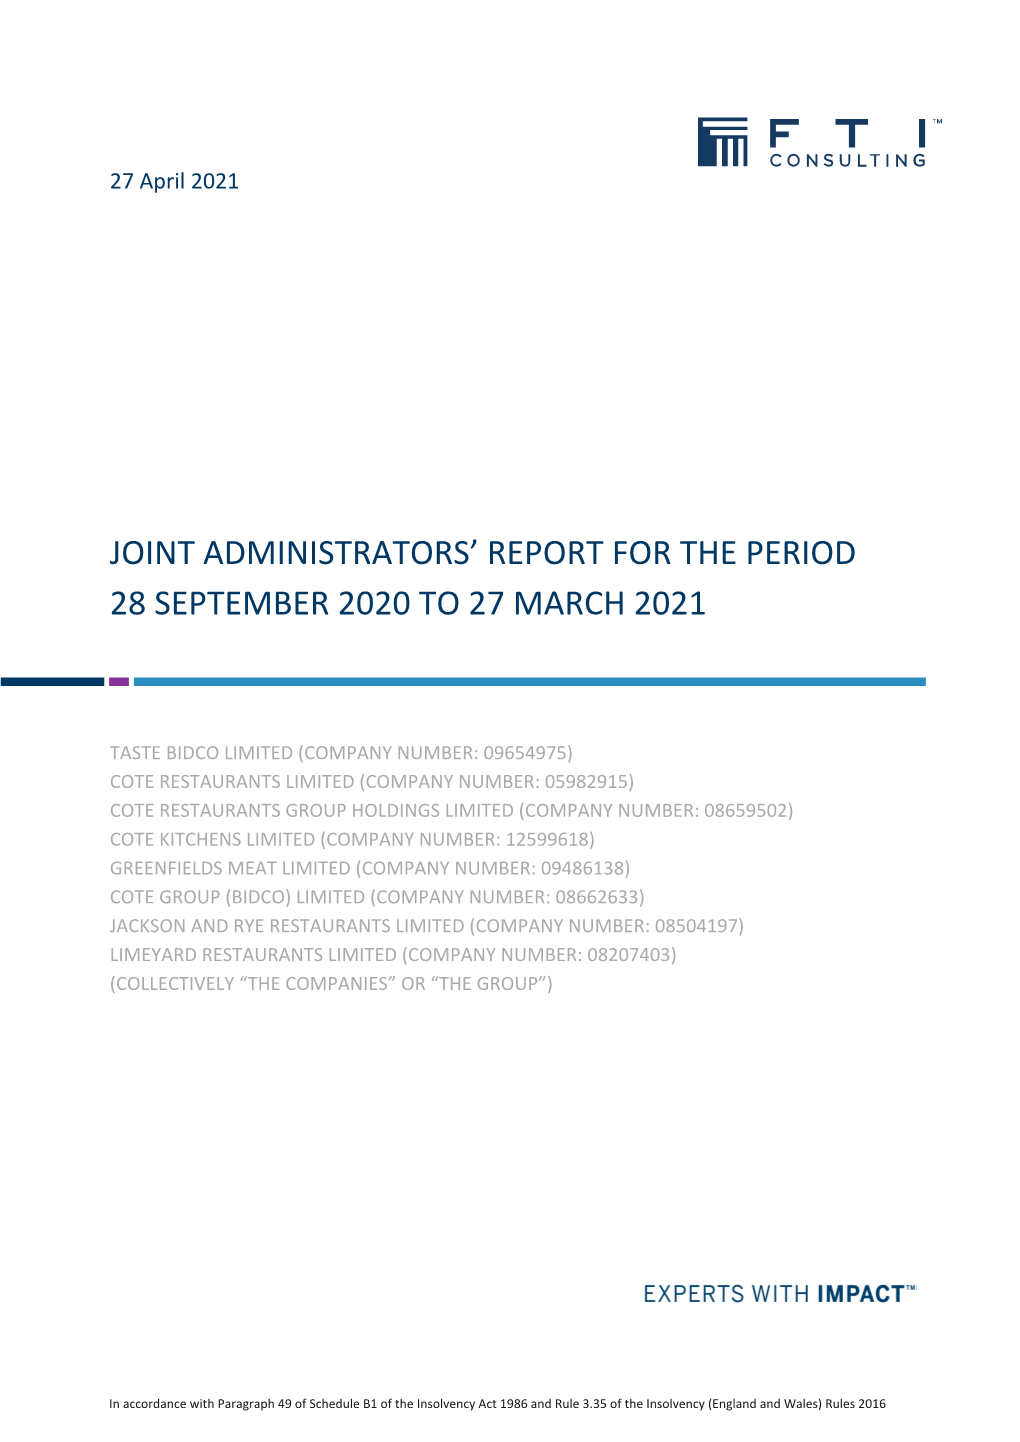 Joint Administrators' Report for the Period 28 September 2020 to 27